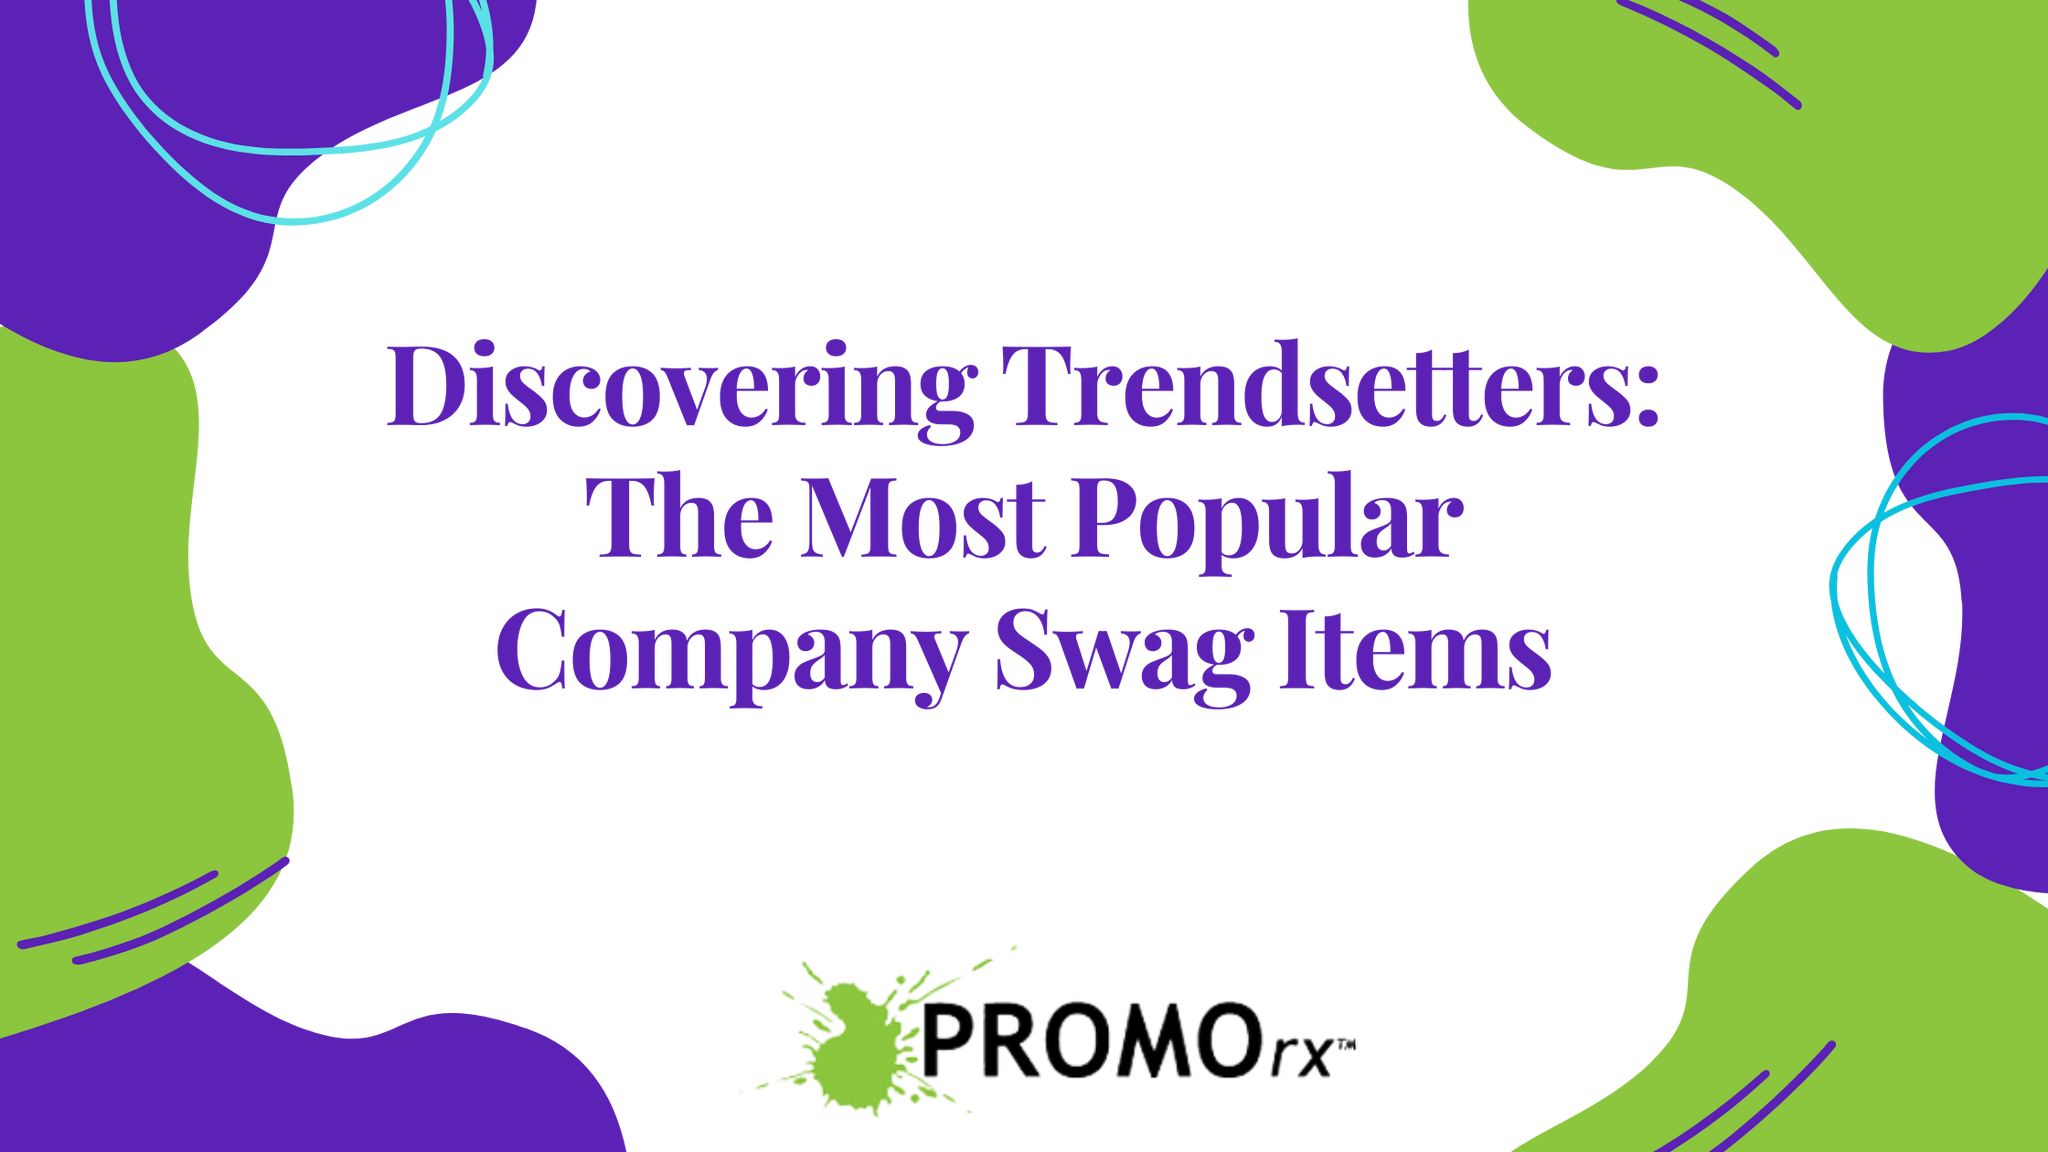 Discovering Trendsetters: The Most Popular Company Swag Items